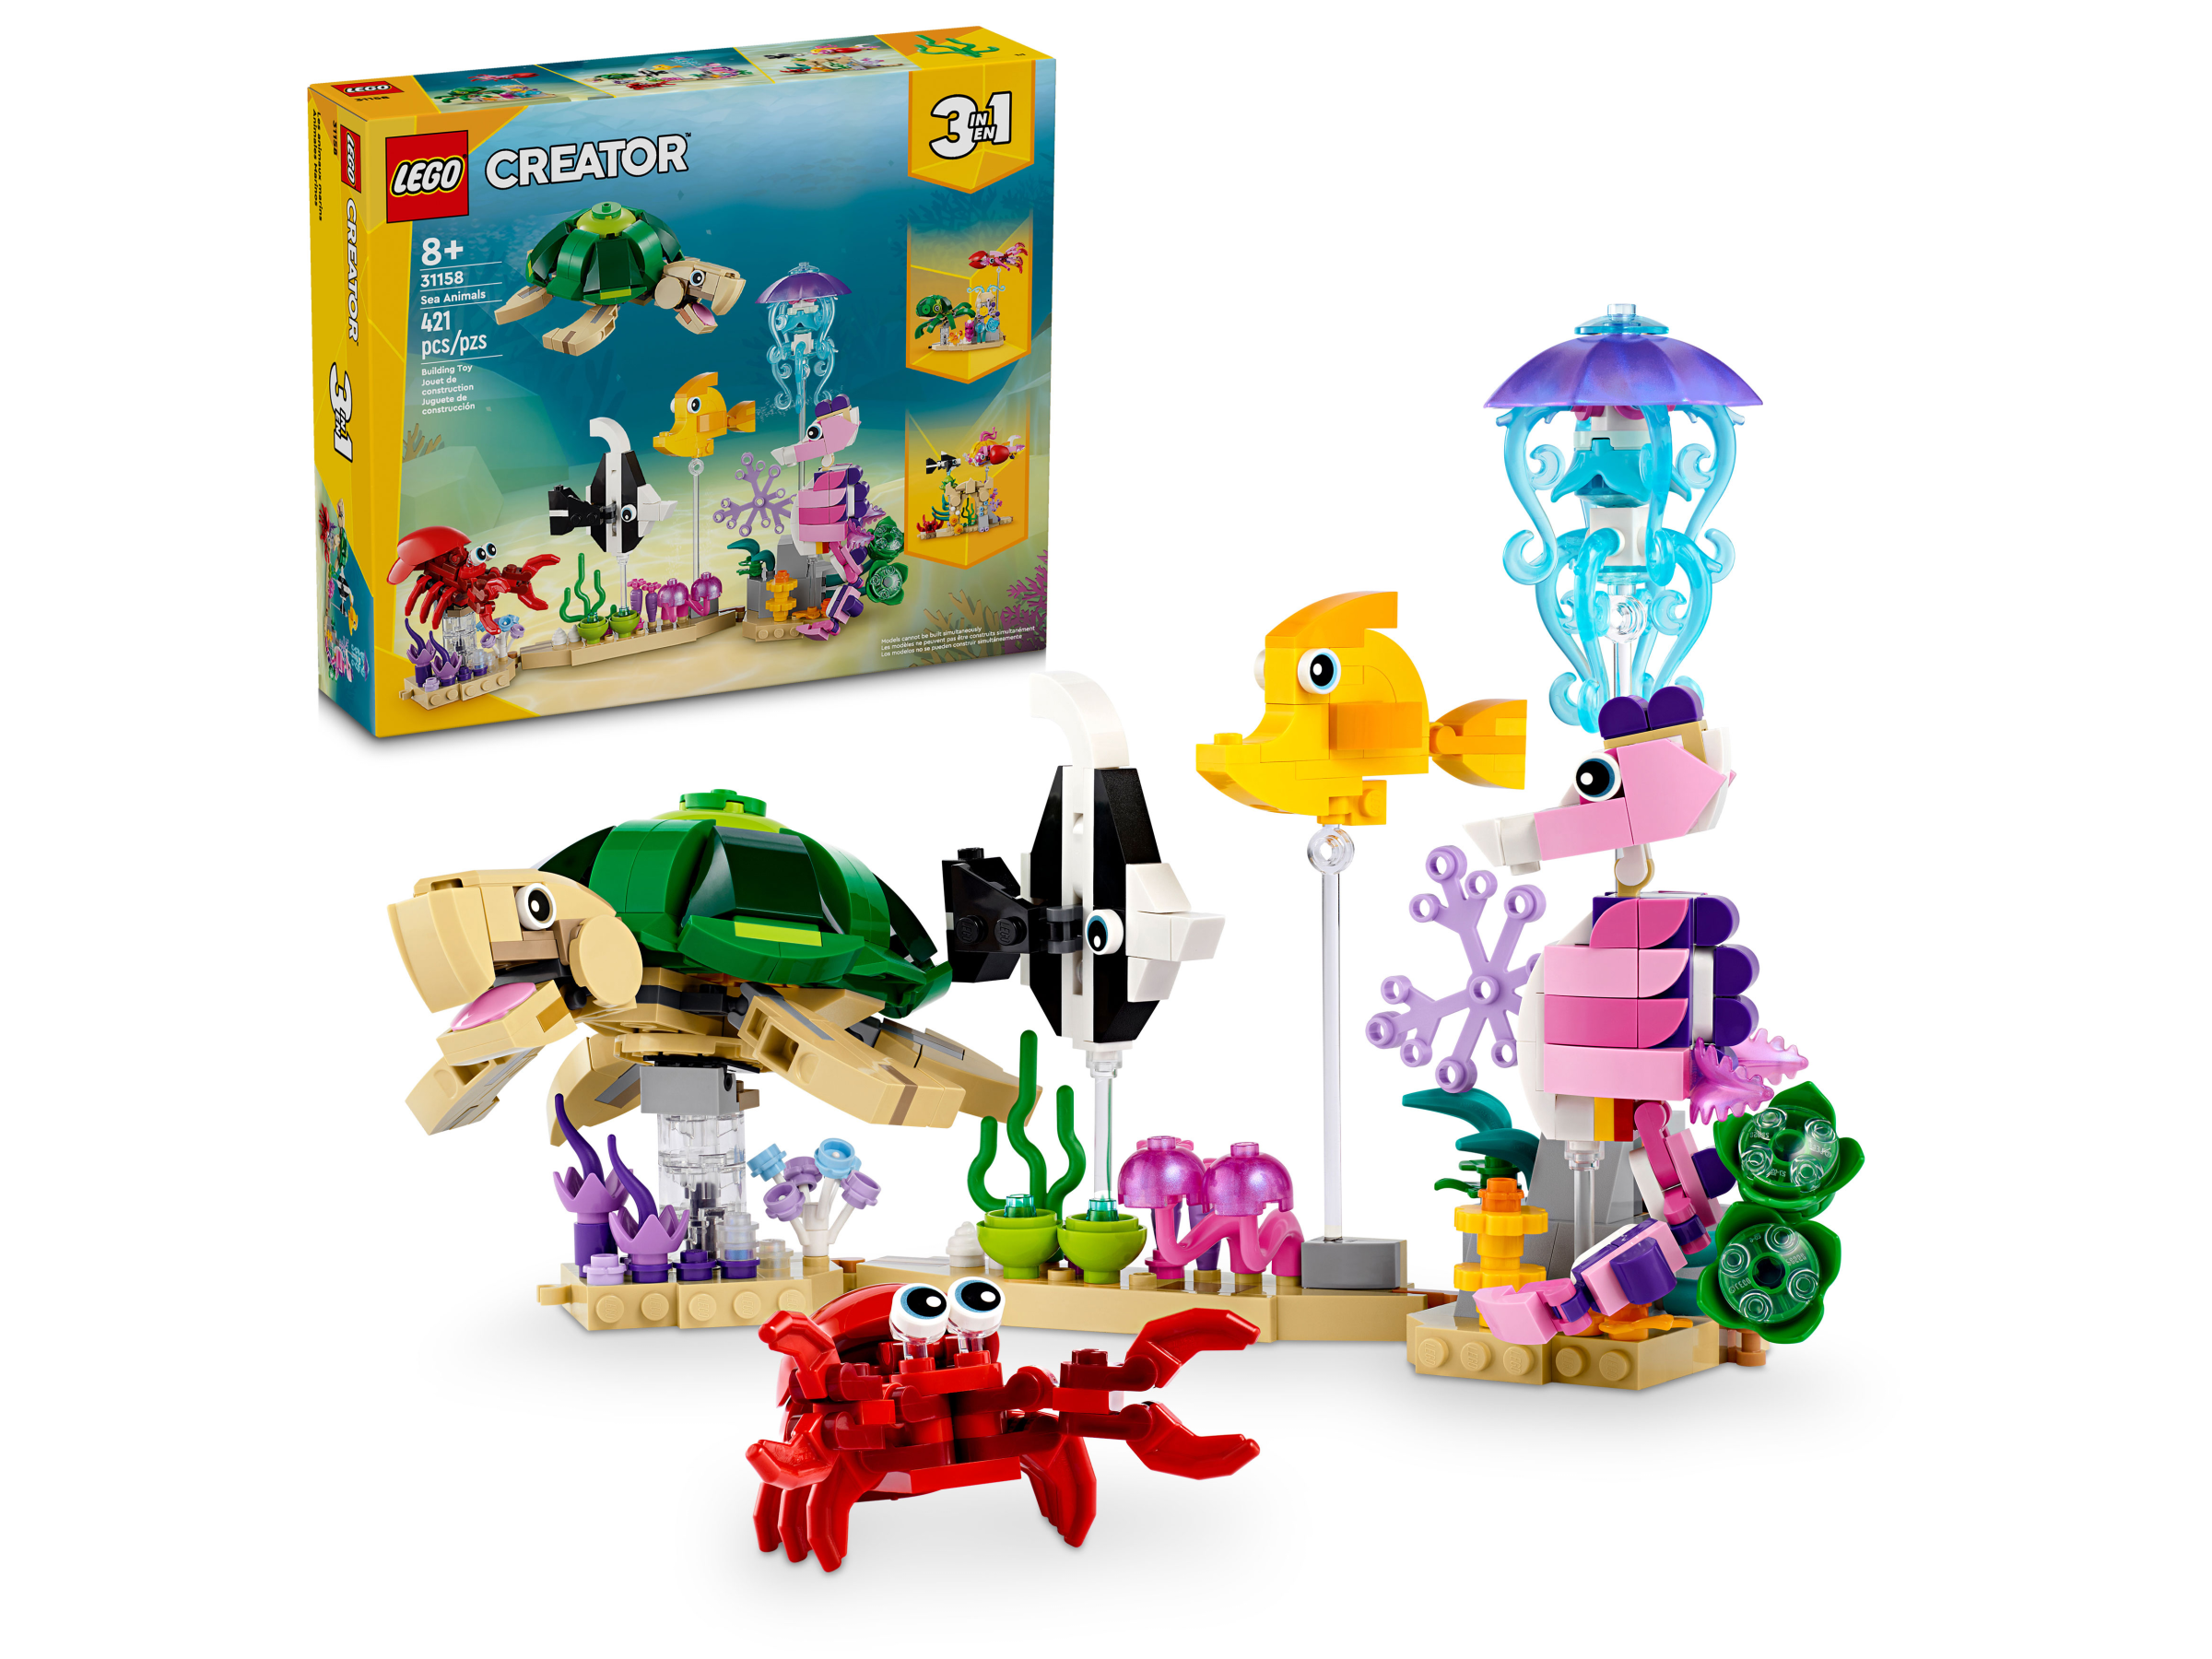 Gifts & Toys for 6, 7 and 8 Year Olds